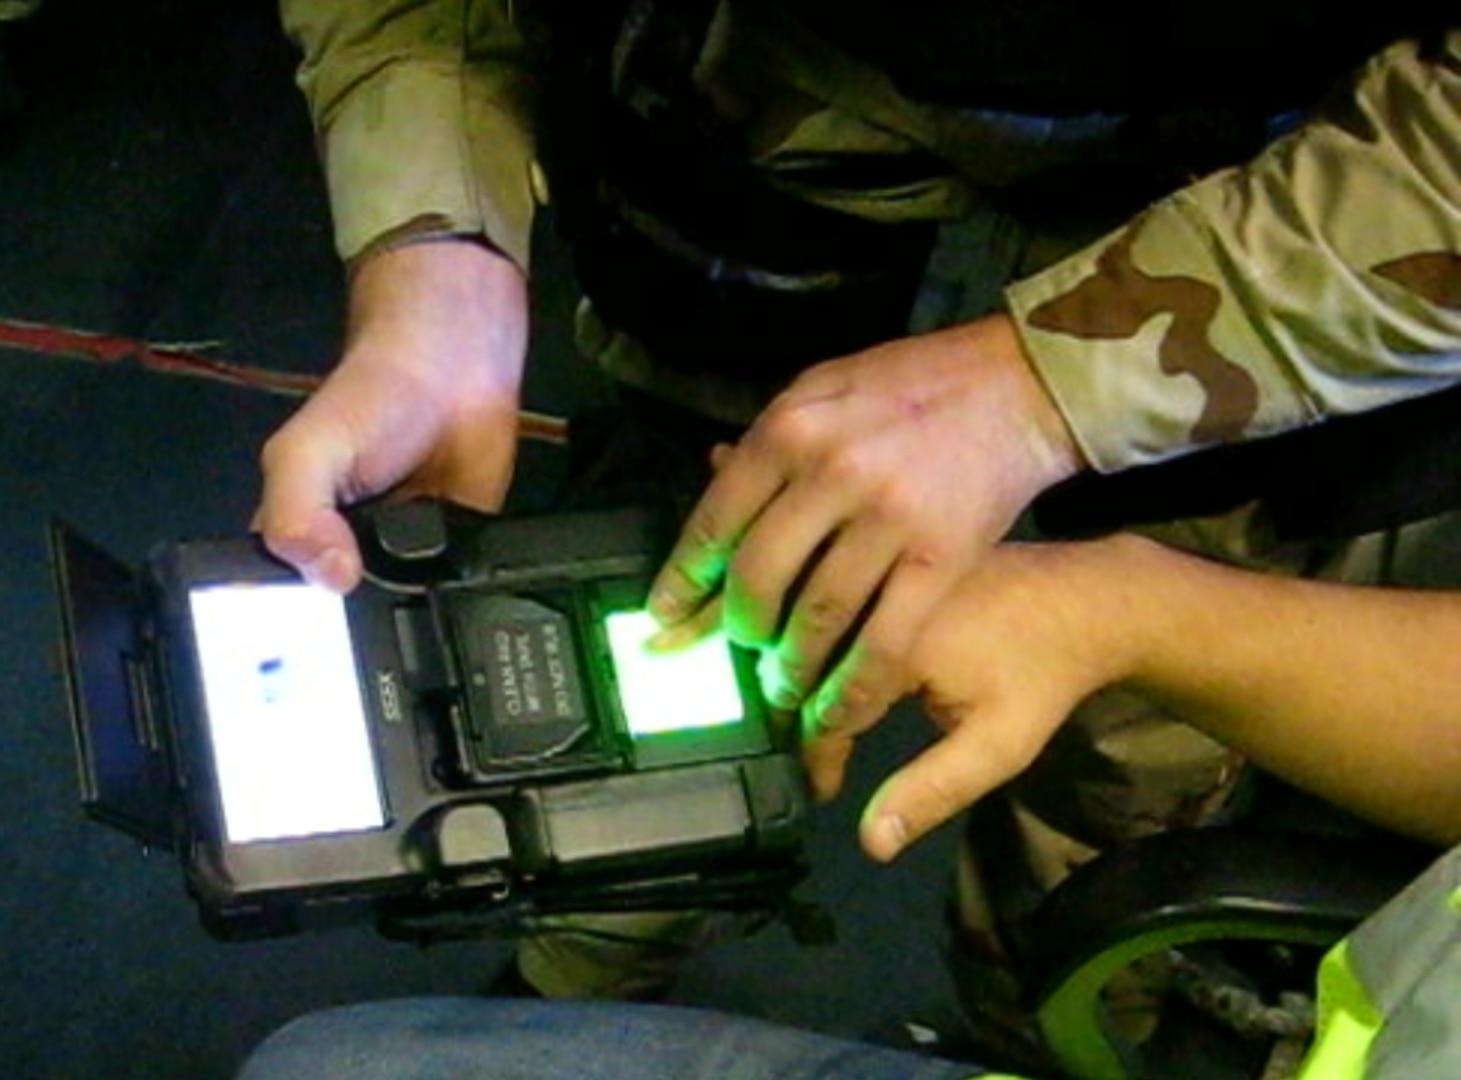 IMAGE: NORFOLK, Va. – A Sailor from a Navy visit, board, search and seizure team is collecting a subject’s biometrics via fingerprints for possible subject identification in the Identity Dominance System (IDS). The system – to be upgraded with a Naval Surface Warfare Center Dahlgren Division (NSWCDD)-developed IDS technology refresh in fiscal year 2021 – collects biometrics such as face, finger, and iris images, and enrolls that information into a local database to match against known persons of interest. Once the information has been captured, the system sends the information back to the authoritative database. Since the outbreak of COVID-19, NSWCDD scientists and engineers transitioned to telework while developing software in support of a complete technology refresh focused on modifying the IDS form factor to be smaller and lighter with an enhanced system performance that increases computing power, speed, local matching and communications capabilities.  (U.S. Navy photo/Released)